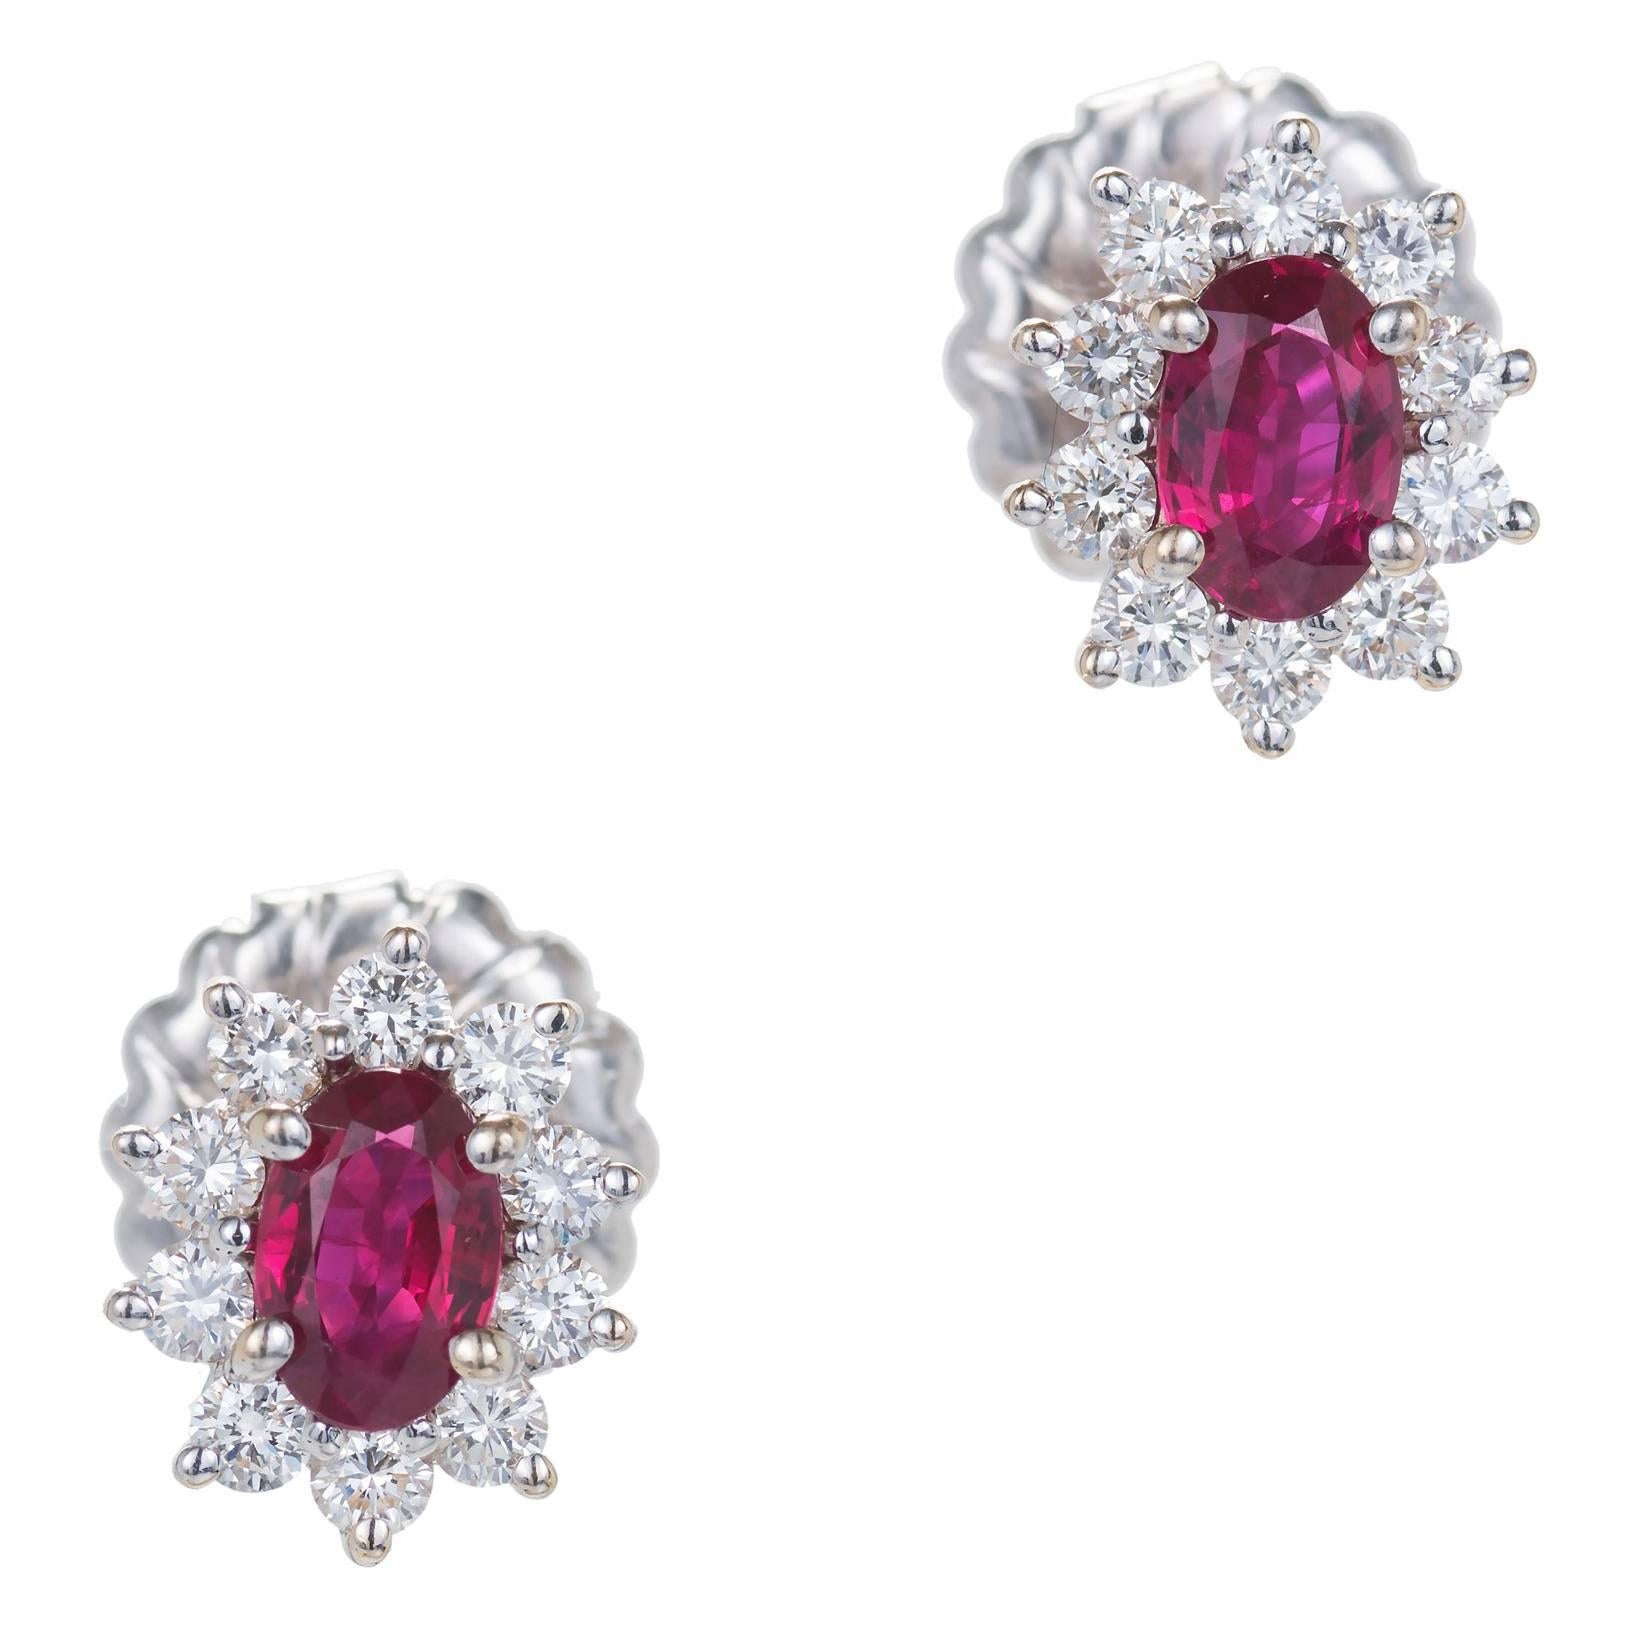 1.30 Carat GIA Certified Ruby Diamond Halo Gold Cluster Earrings